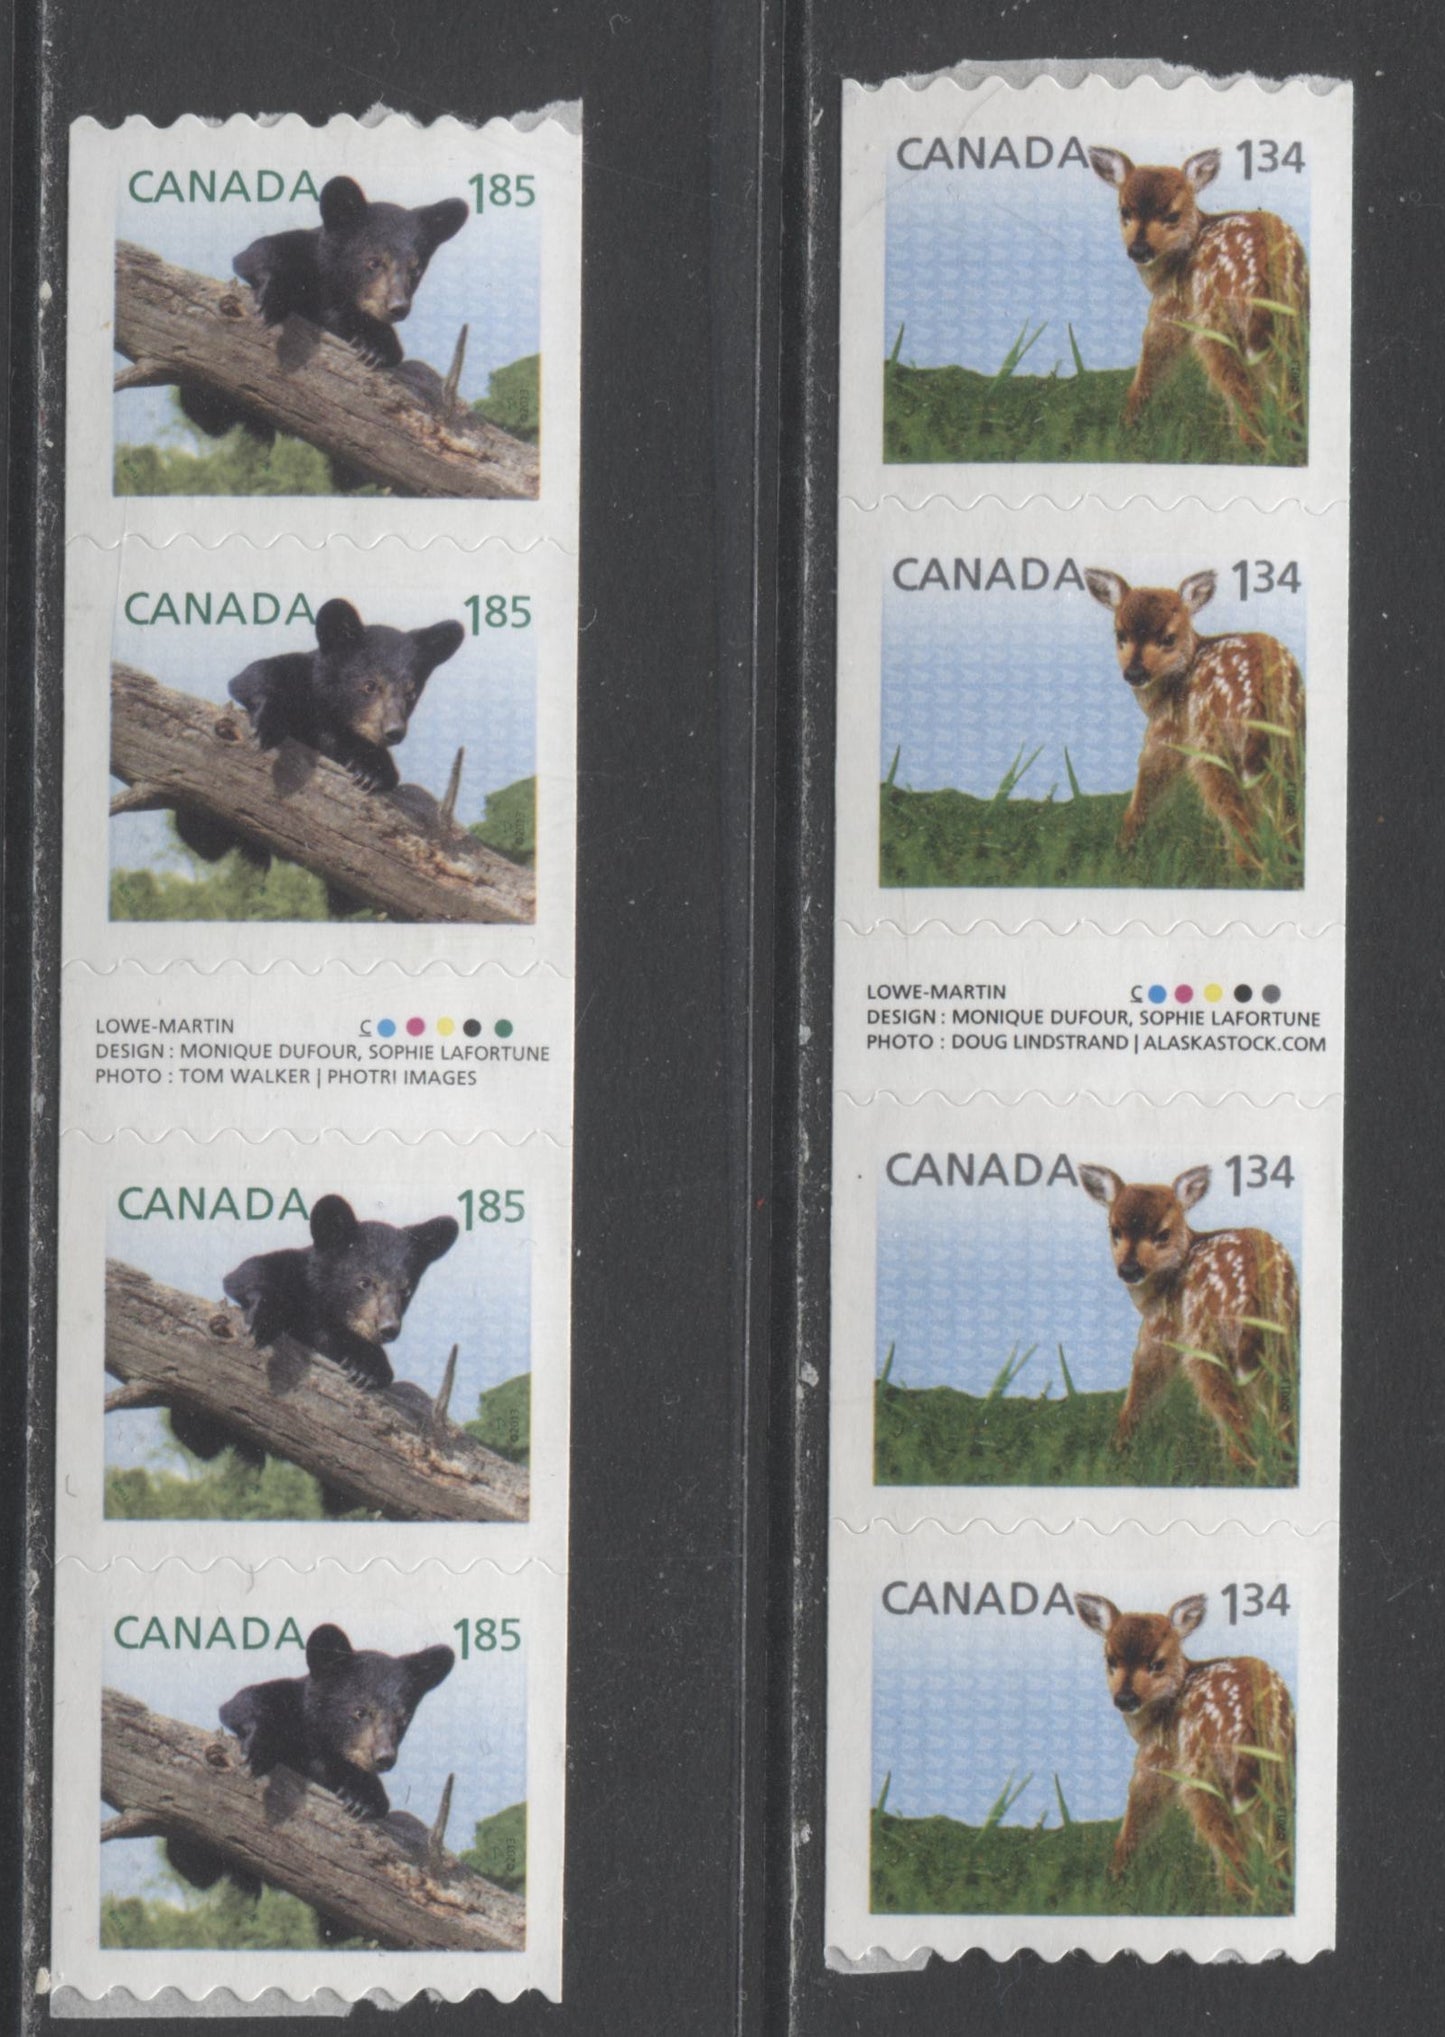 Lot 139D Canada #2606i, 2607i $1.34-$1.85 Multicolored Fawn & Black Bear, 2013 Baby Wildlife Definitives, 2 VFNH Gutter Strips Of 4